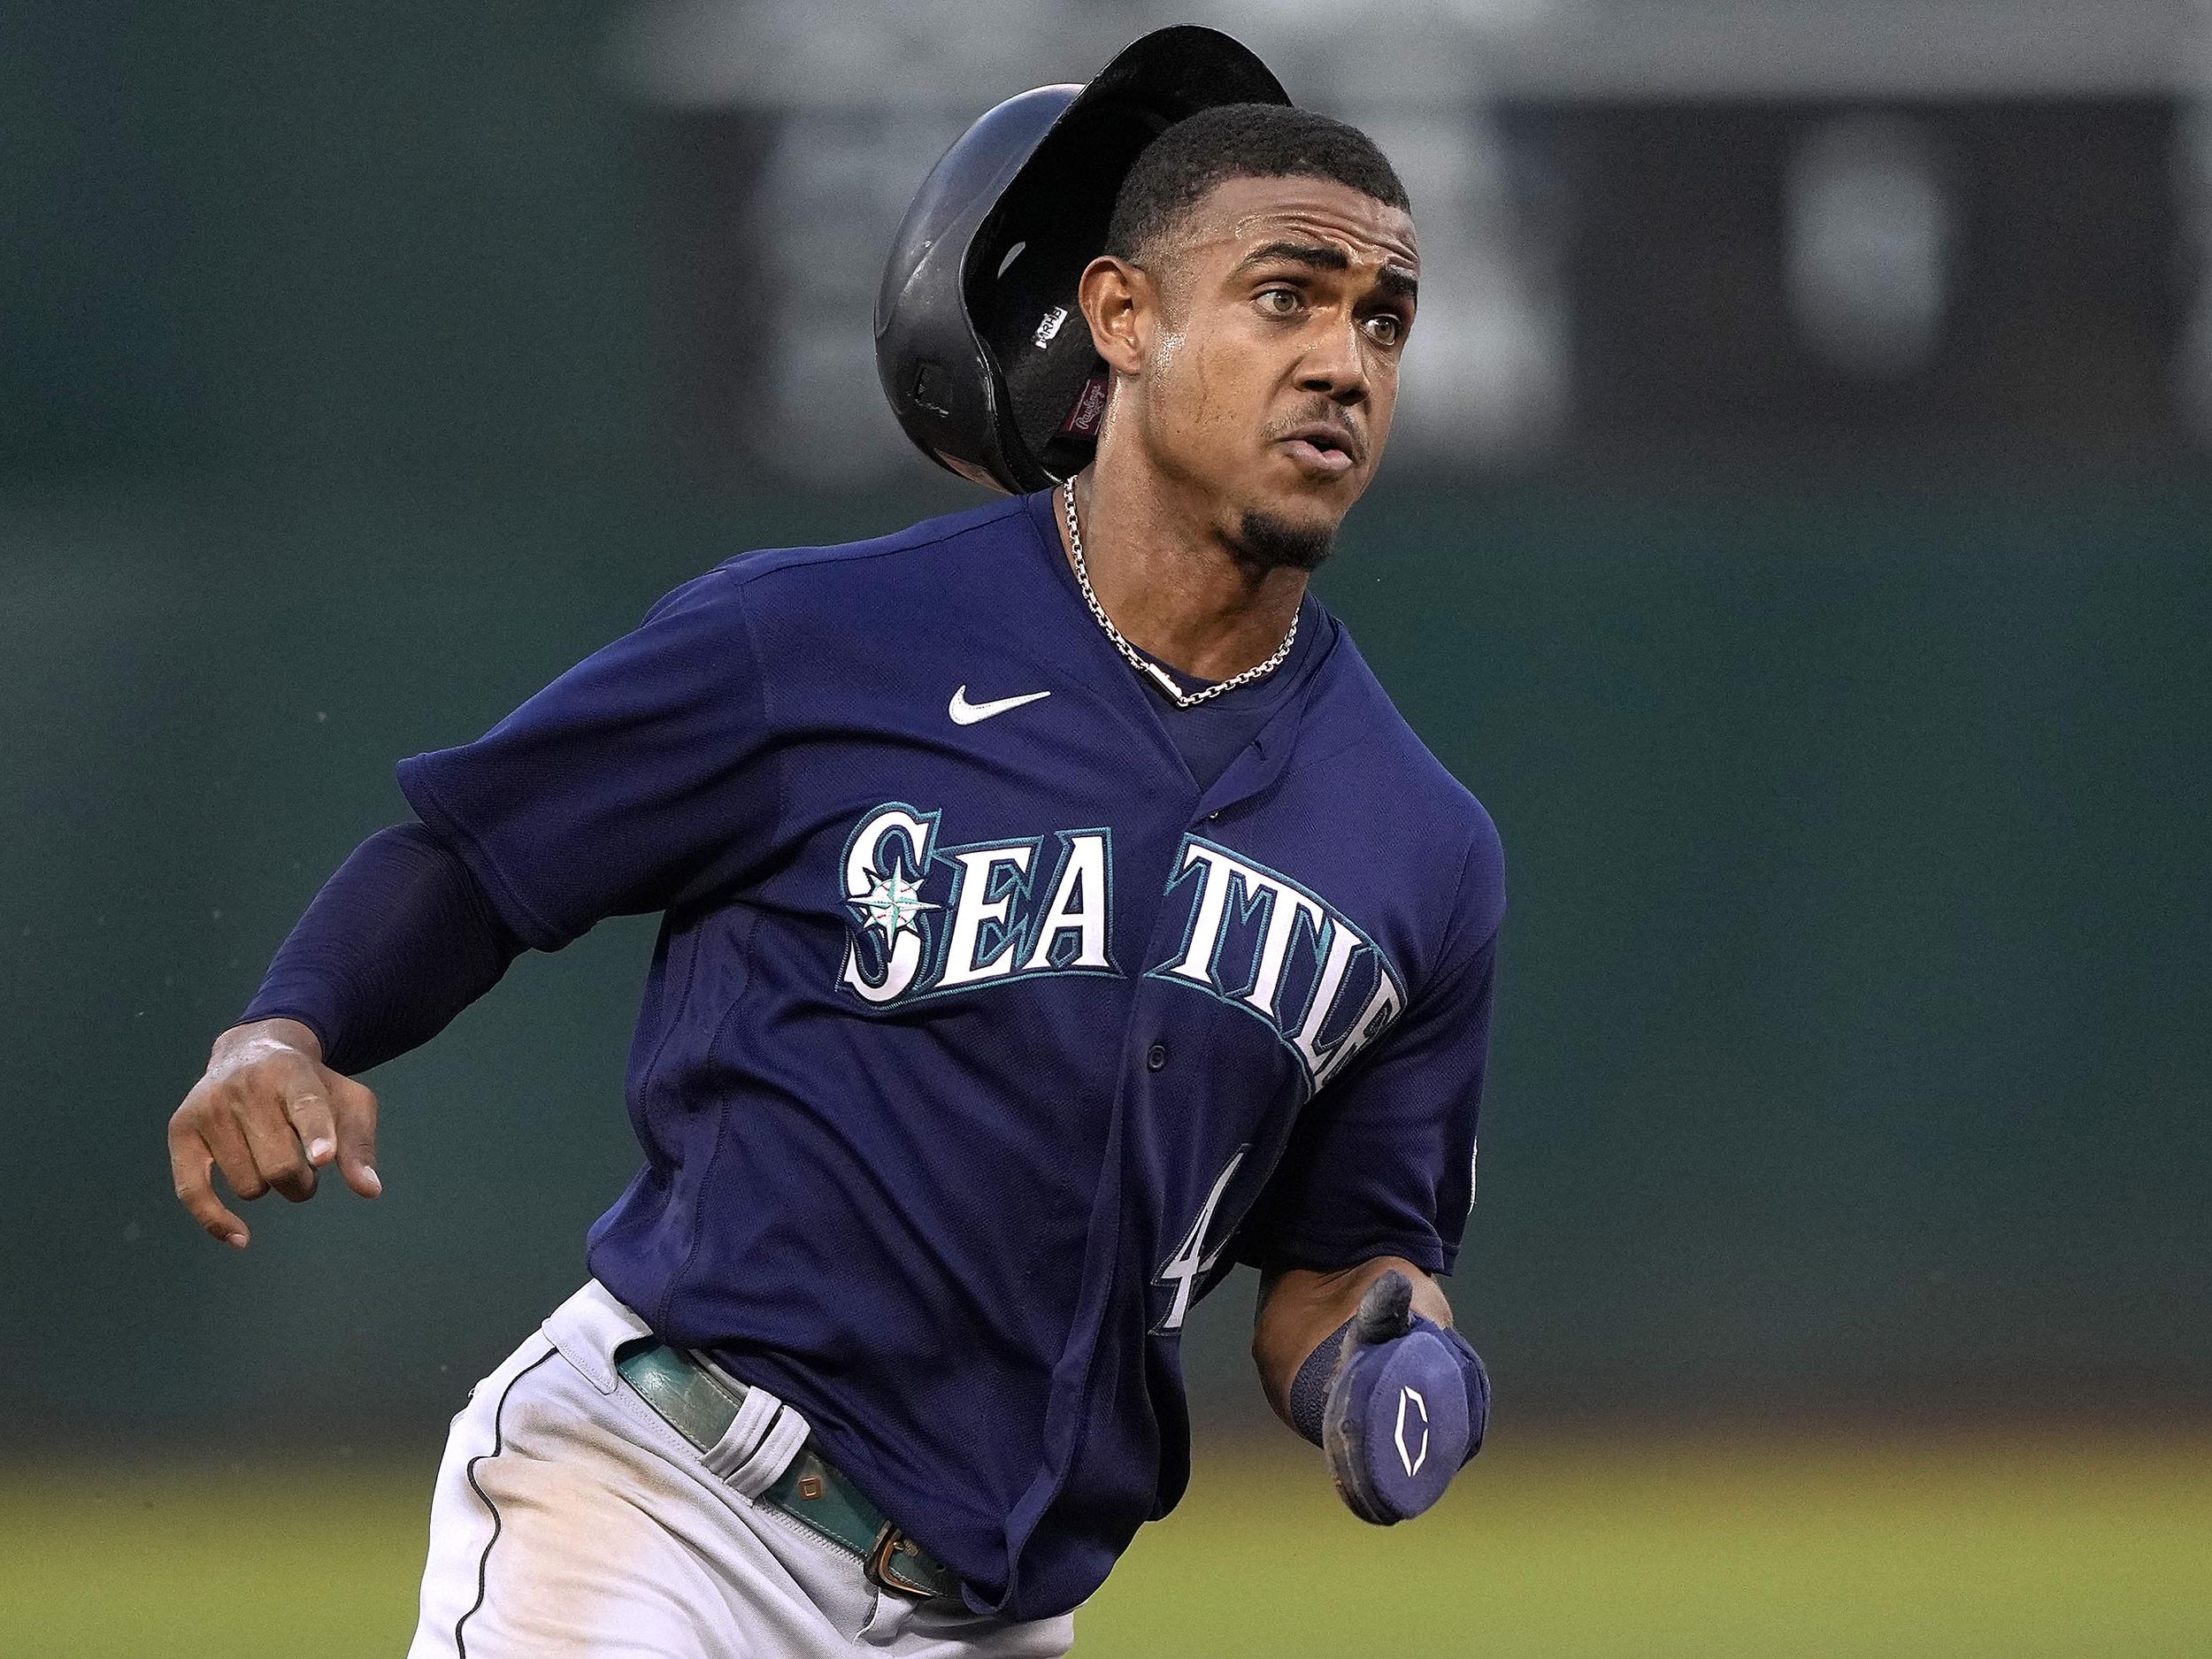 Julio Rodriguez rekindles memories with loyal Mariners fans after